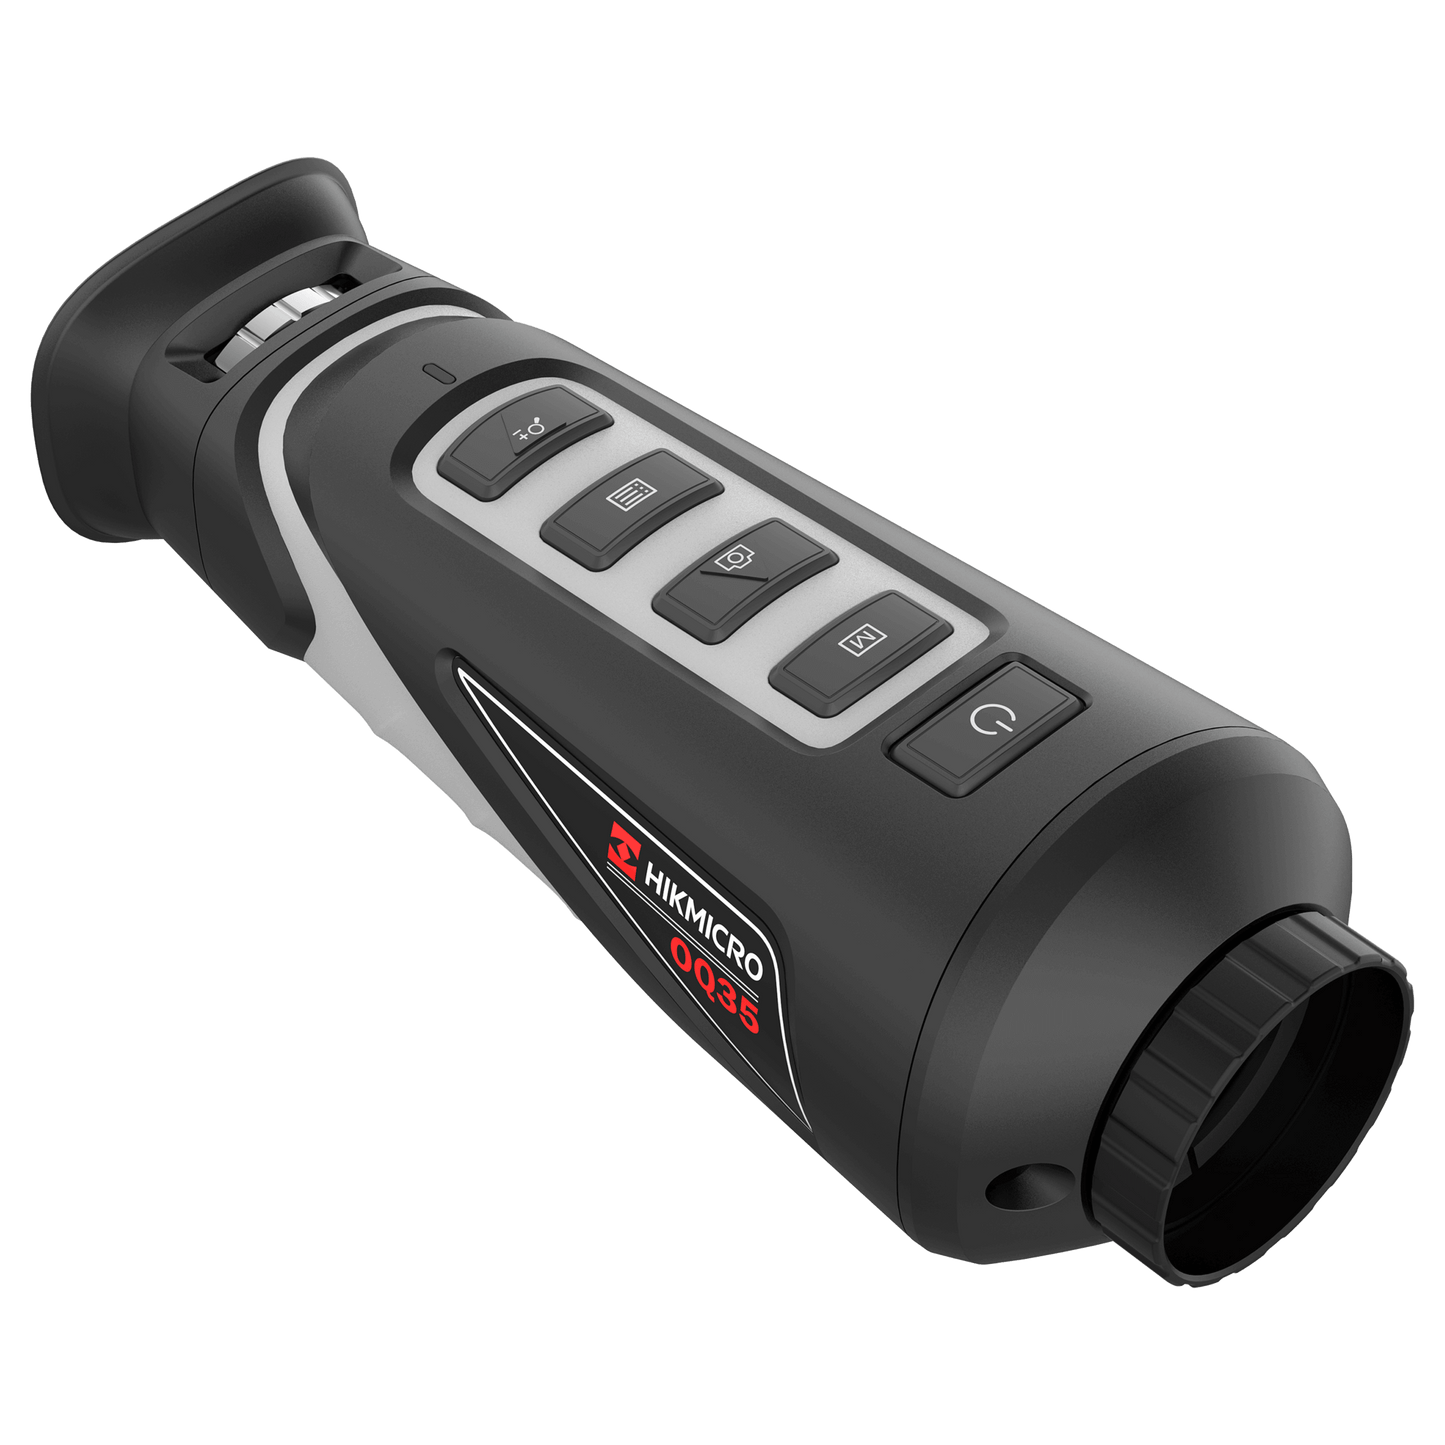 Cape Thermal - The best thermal imaging monoculars for sale - HikMicro OWL OQ35 Handheld thermal imaging monocular - Right Side View